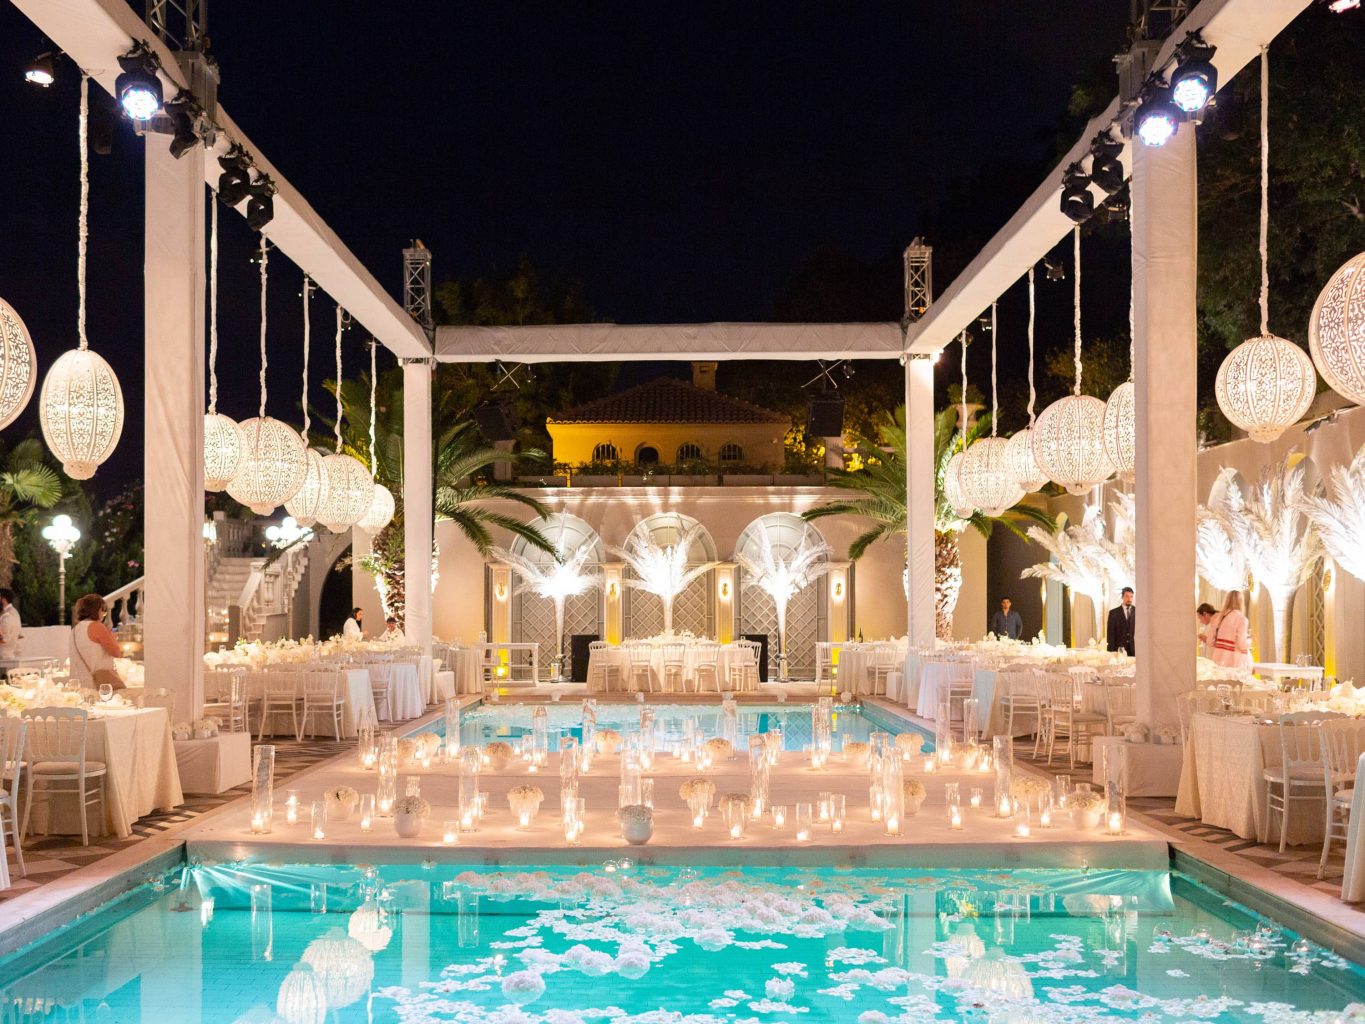 Nighttime and pool decor for white party at this Istanbul wedding weekend at Four Seasons Bosphorus | Photo by Allan Zepeda